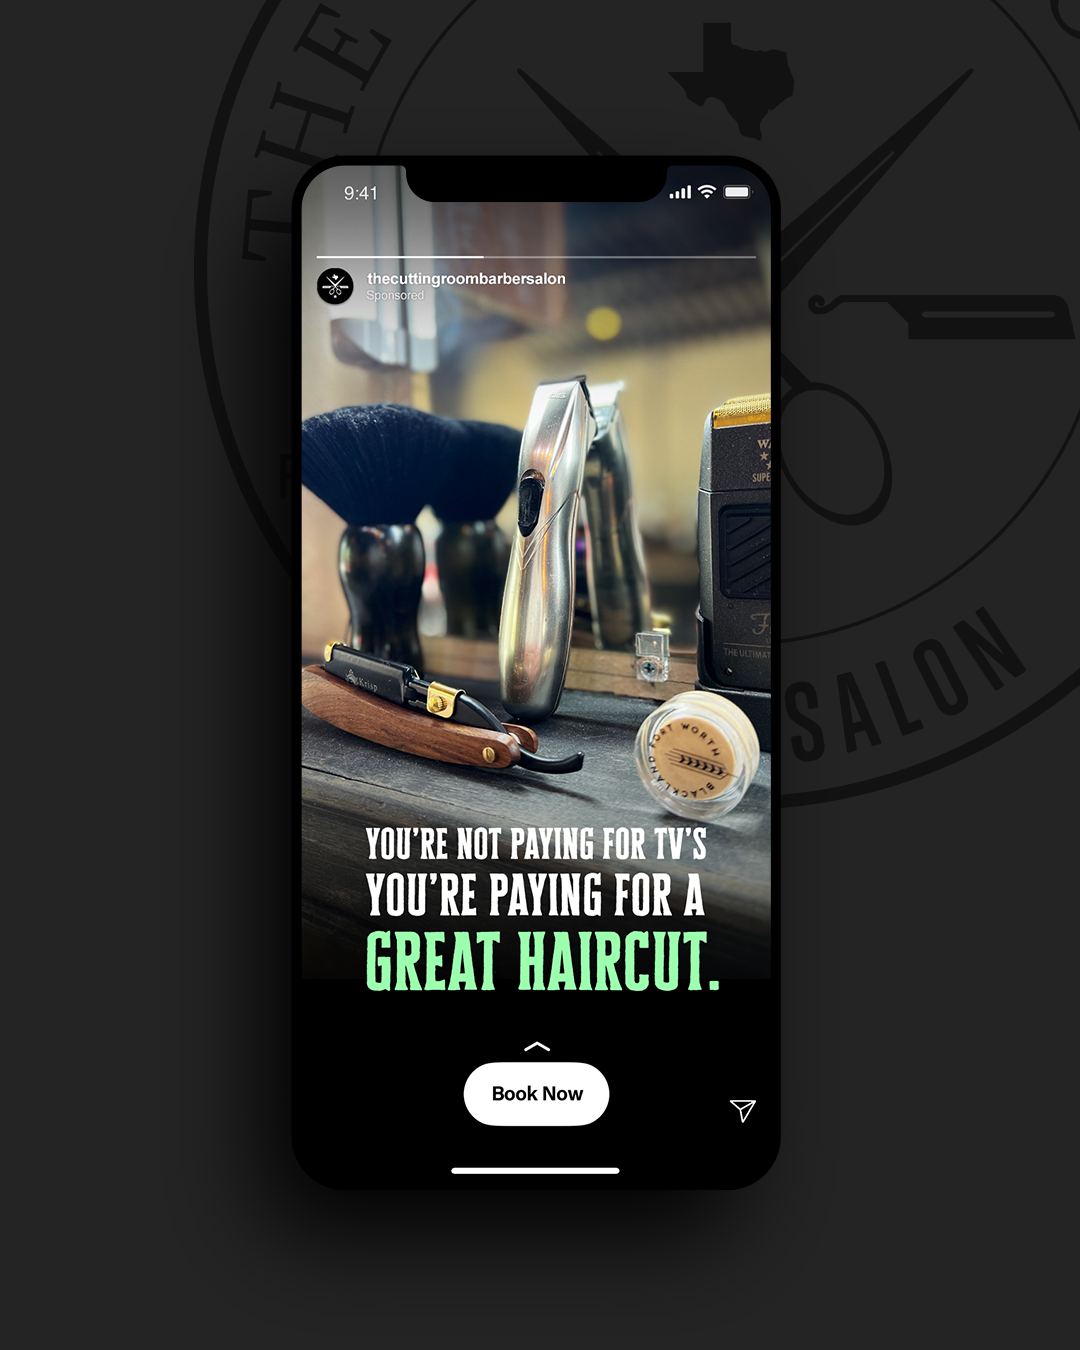 An Instagram story ad shows a brush and various razors with the words “You’re not paying for TV’s. You’re paying for a great haircut.” The call-to-action is “Book Now.”